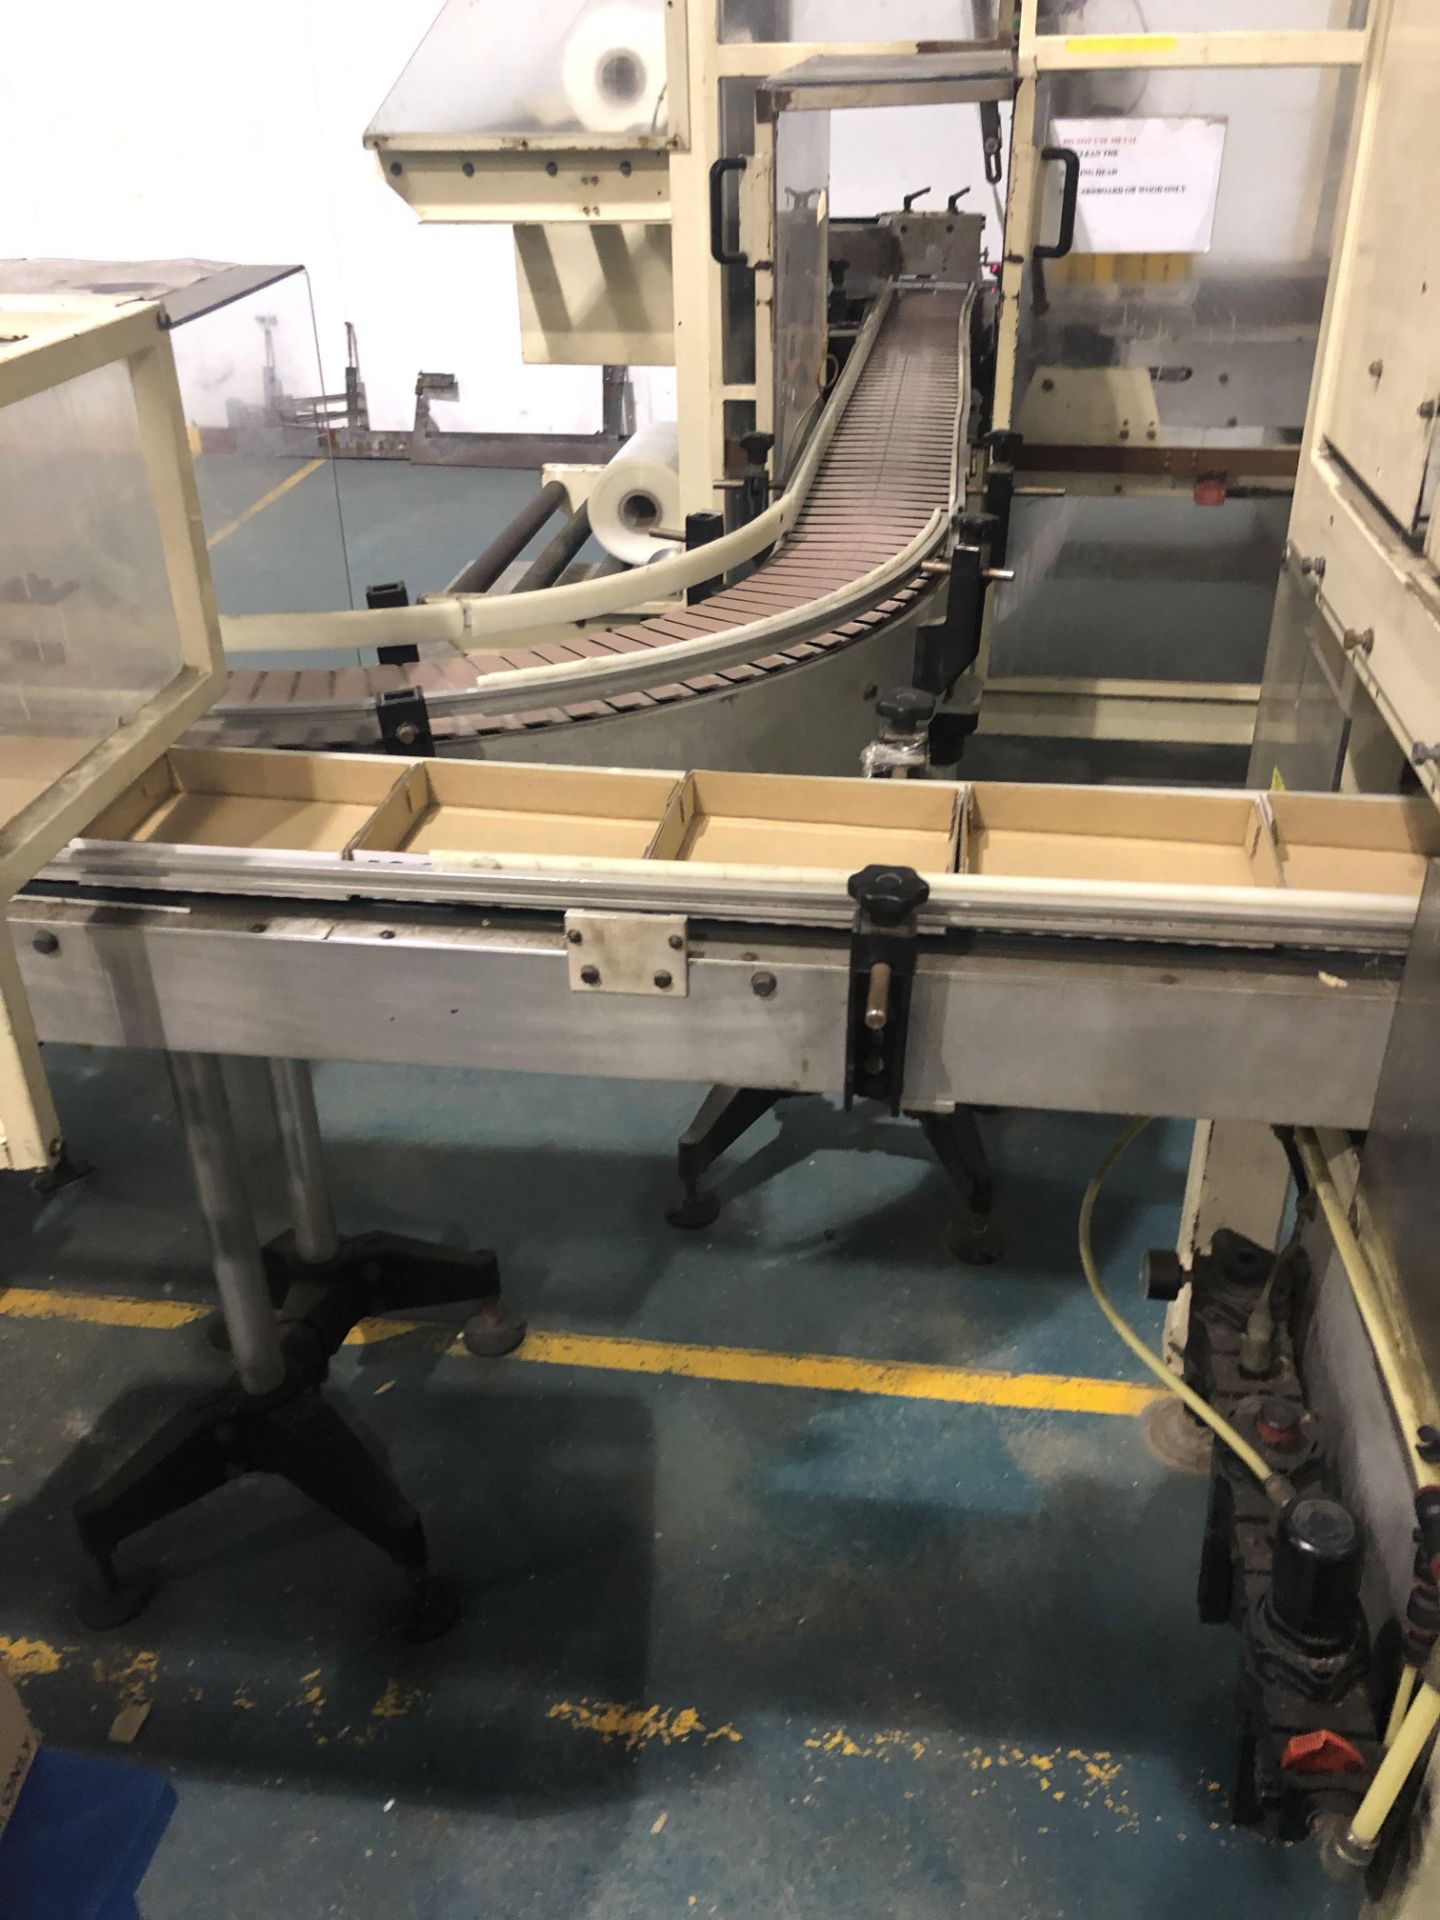 GEI Europack tray former / packer and divider gate - Image 12 of 16